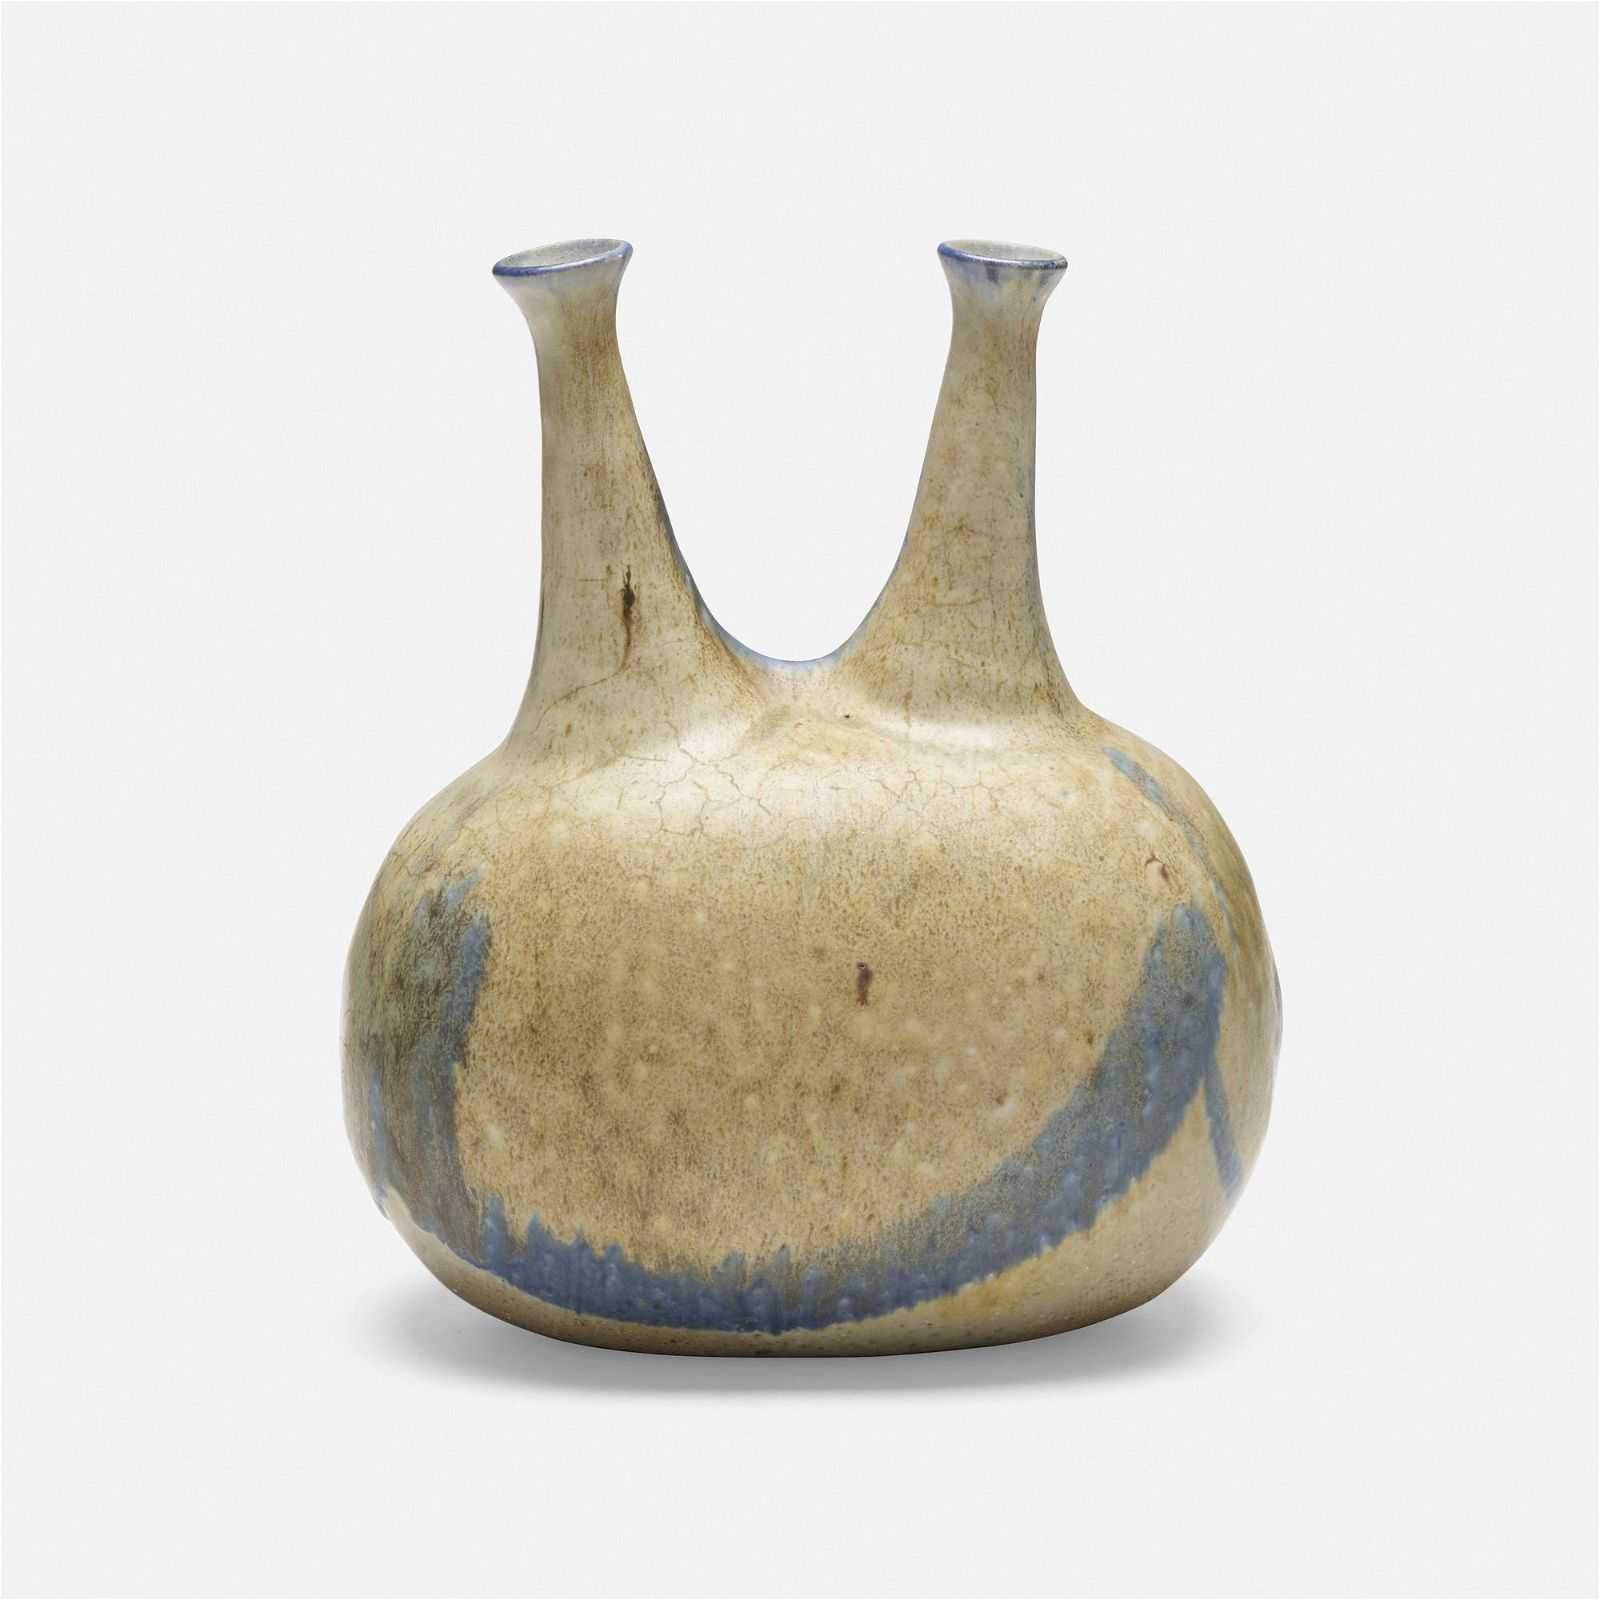 A double-spouted bottle by Toshiko Takaezu realized $13,000 plus the buyer’s premium in September 2022 at Rago Arts and Auction Center. Image courtesy of Rago Arts and Auction Center and LiveAuctioneers.